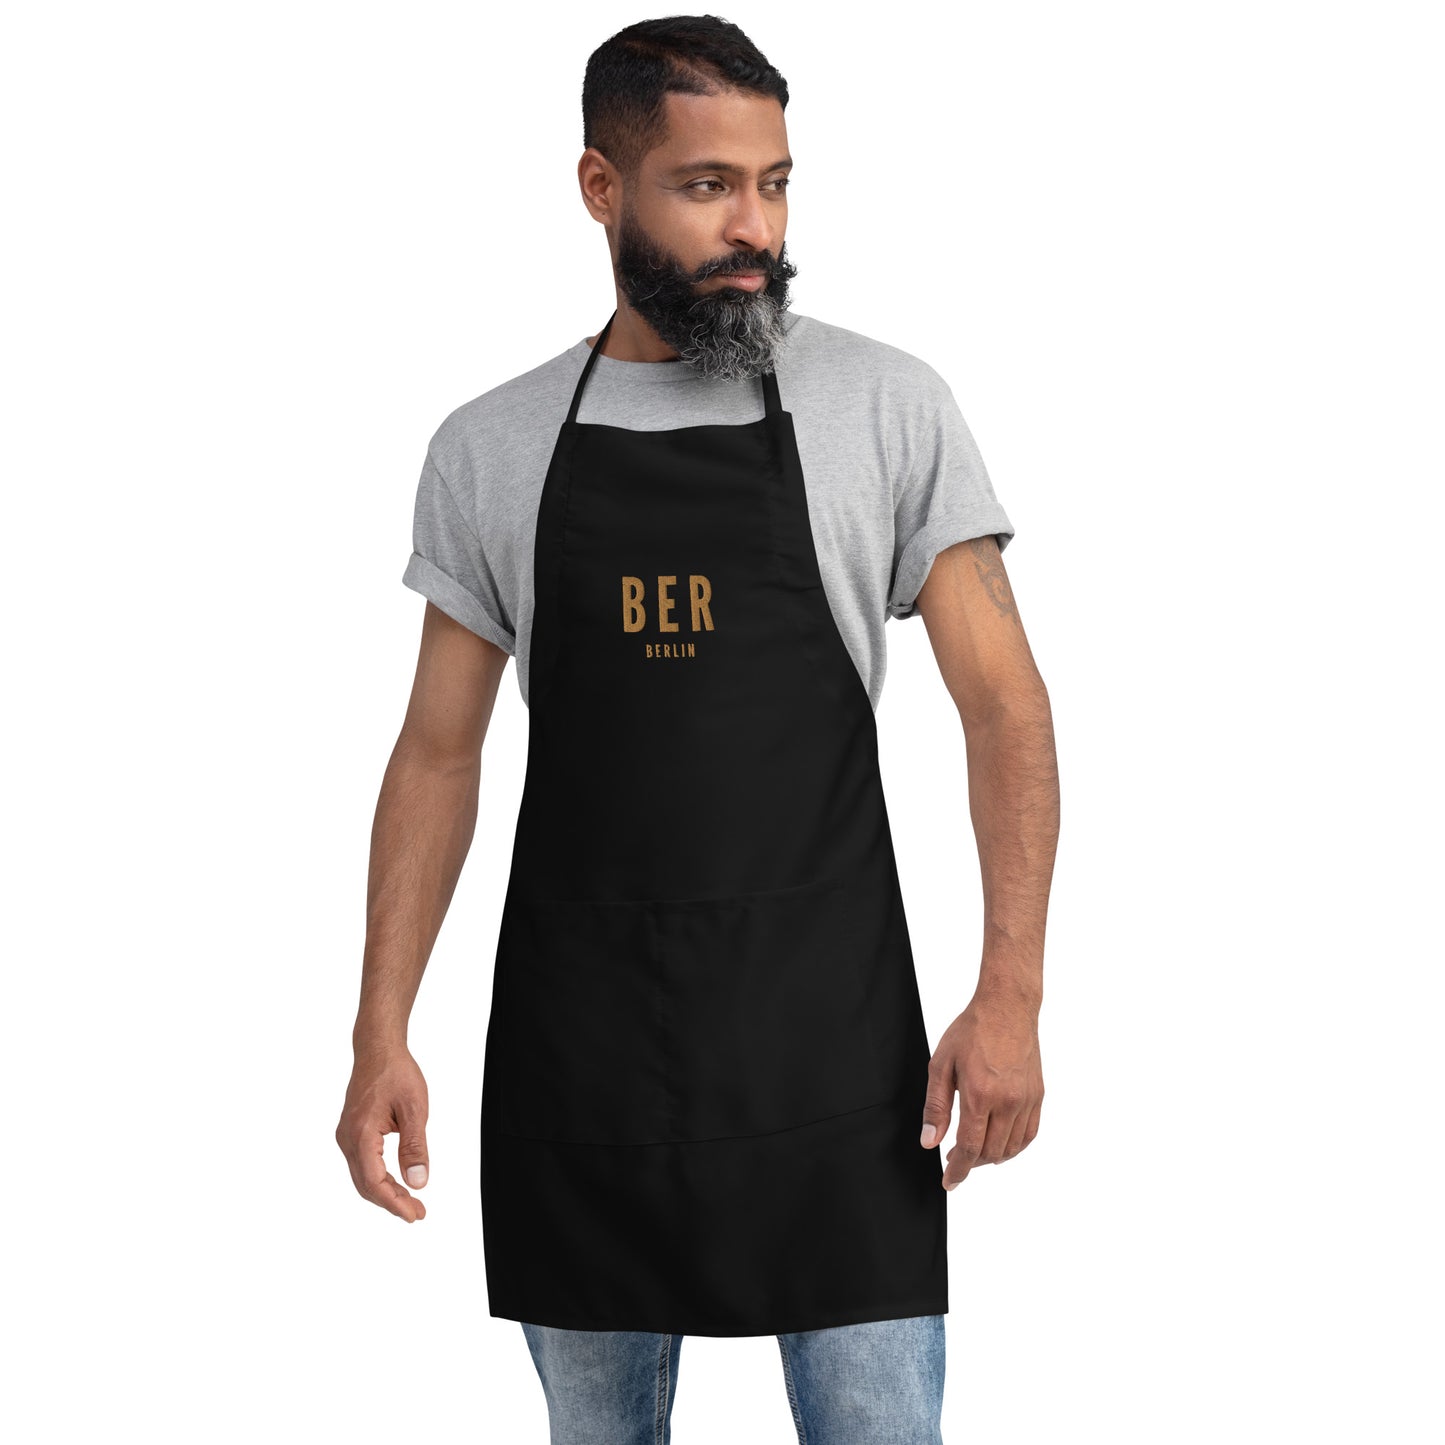 City Embroidered Apron - Old Gold • BER Berlin • YHM Designs - Image 05